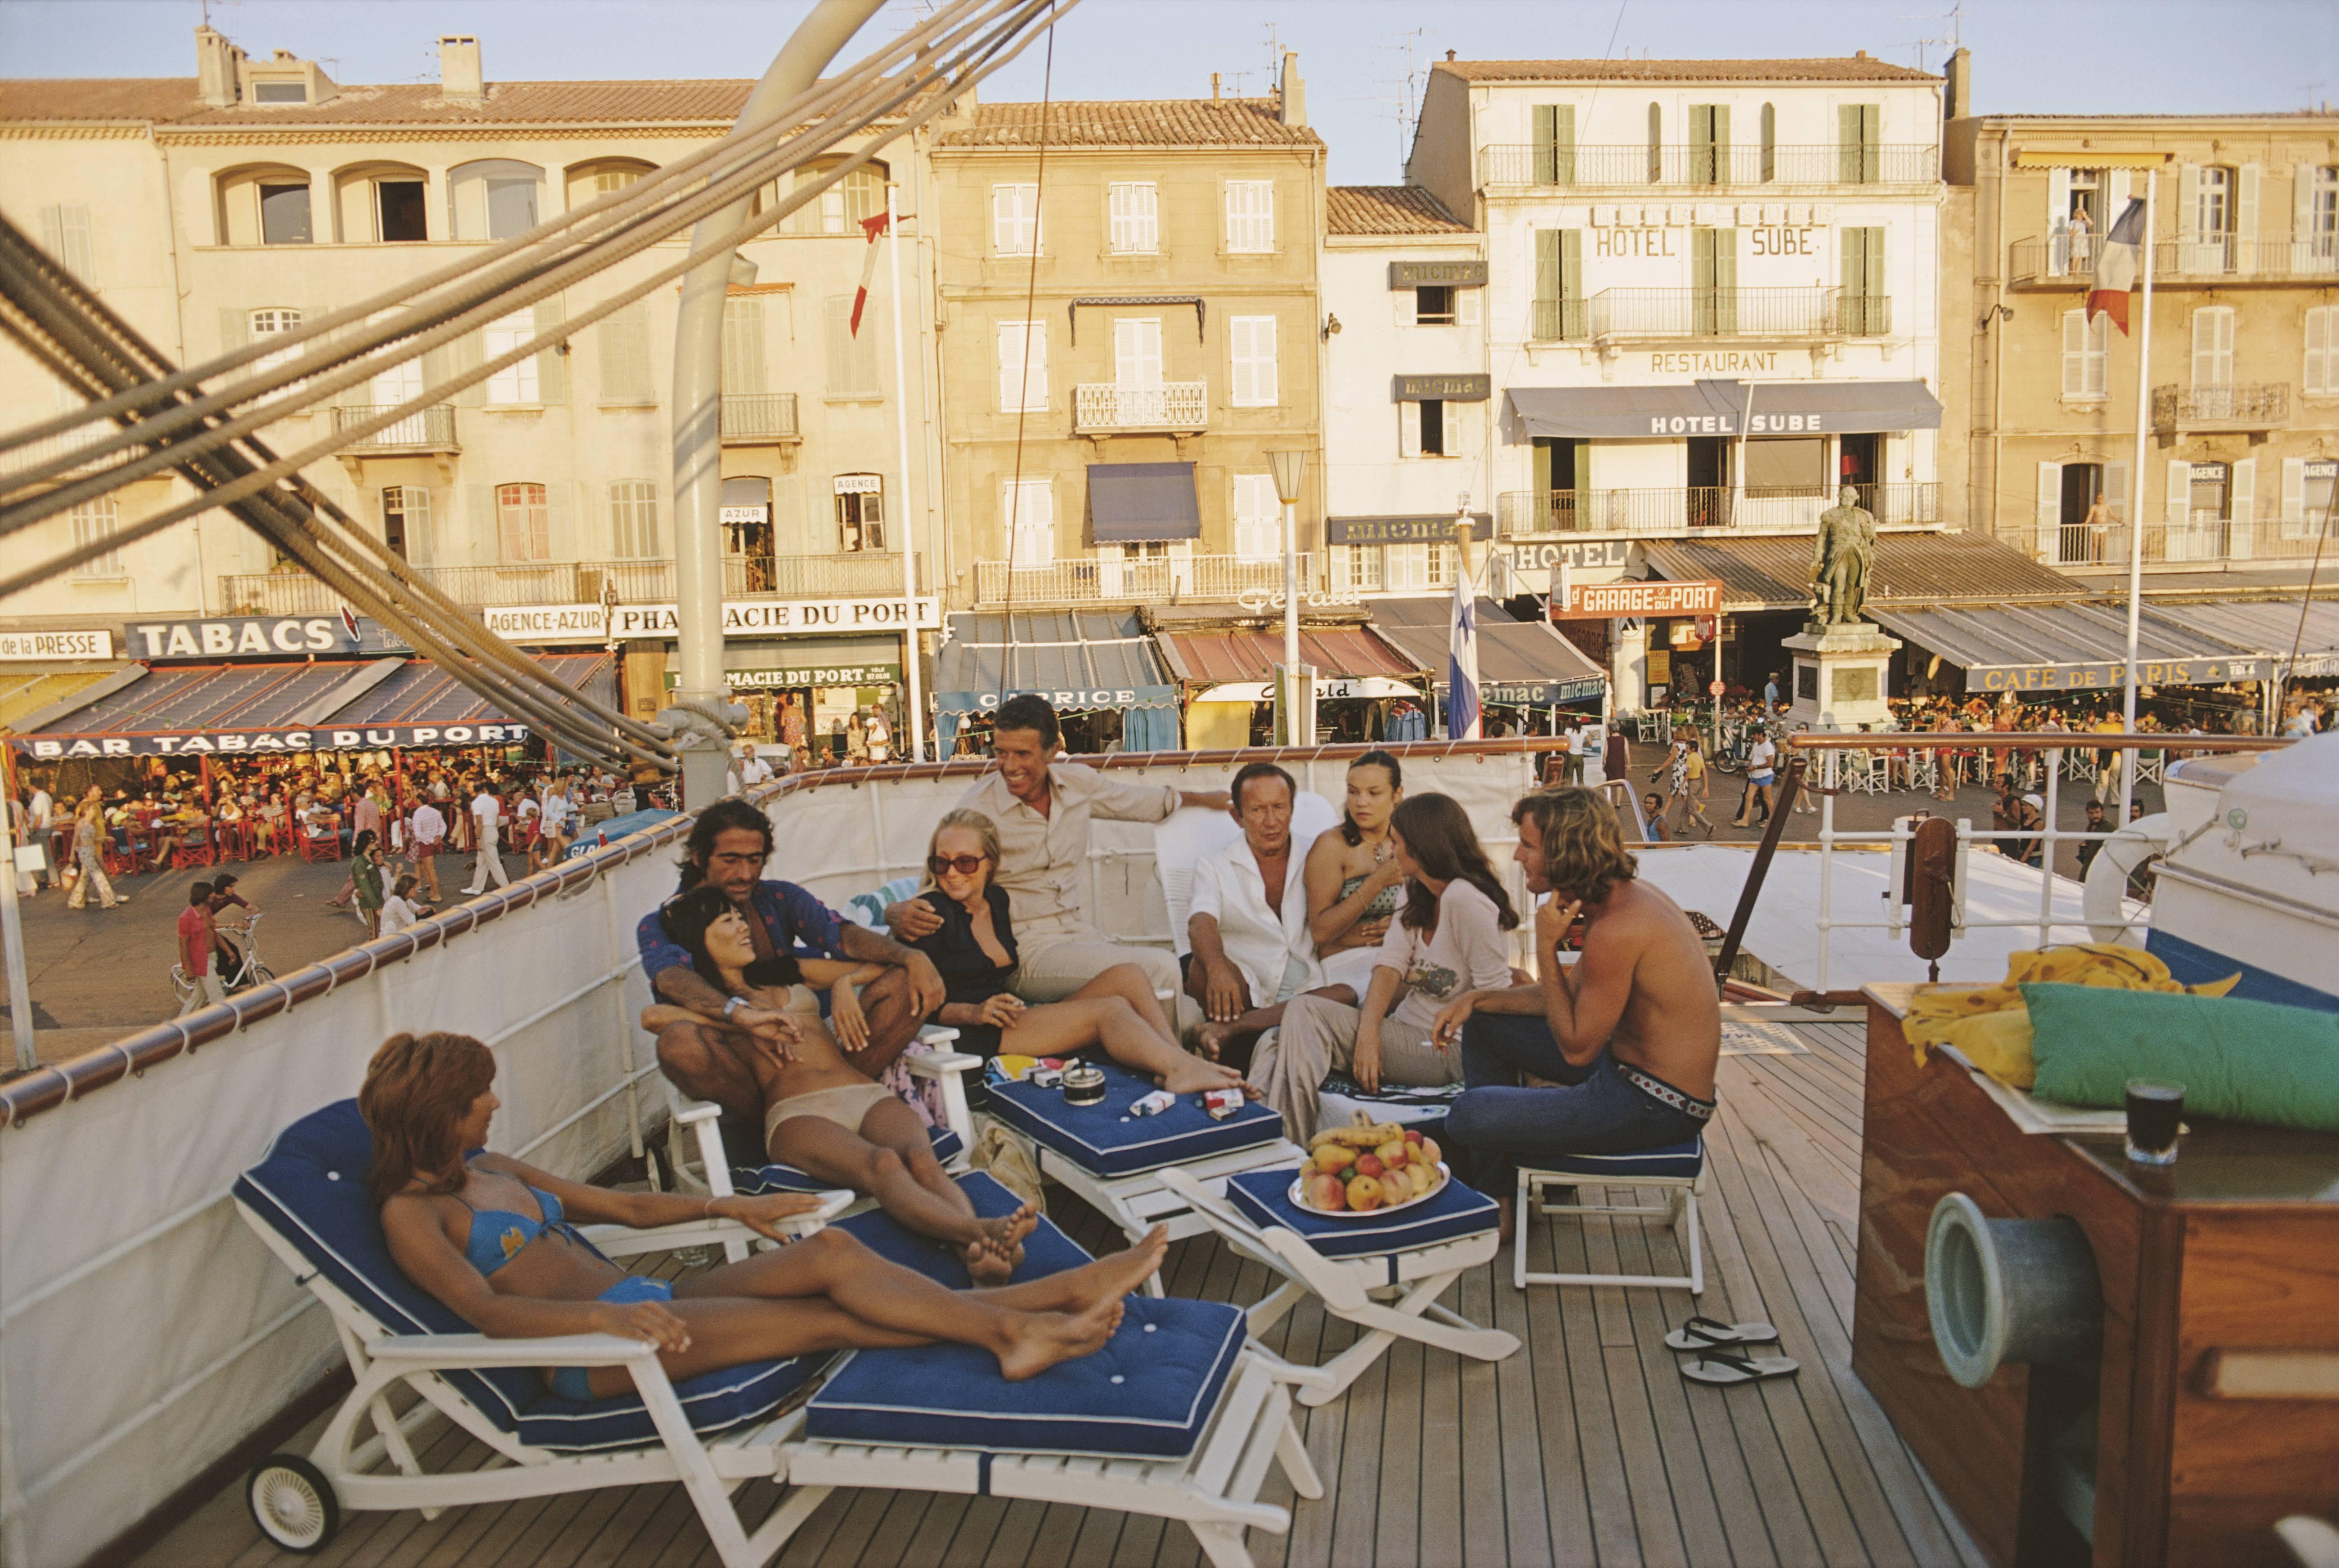 Holidaymakers on the deck of yacht in Saint-Tropez, France, August 1971. (Photo by Slim Aarons/Getty Images)

C-type print from the original transparency held at the Getty Images Archive, London.  Numbered and stamped by The Slim Aarons Estate. 